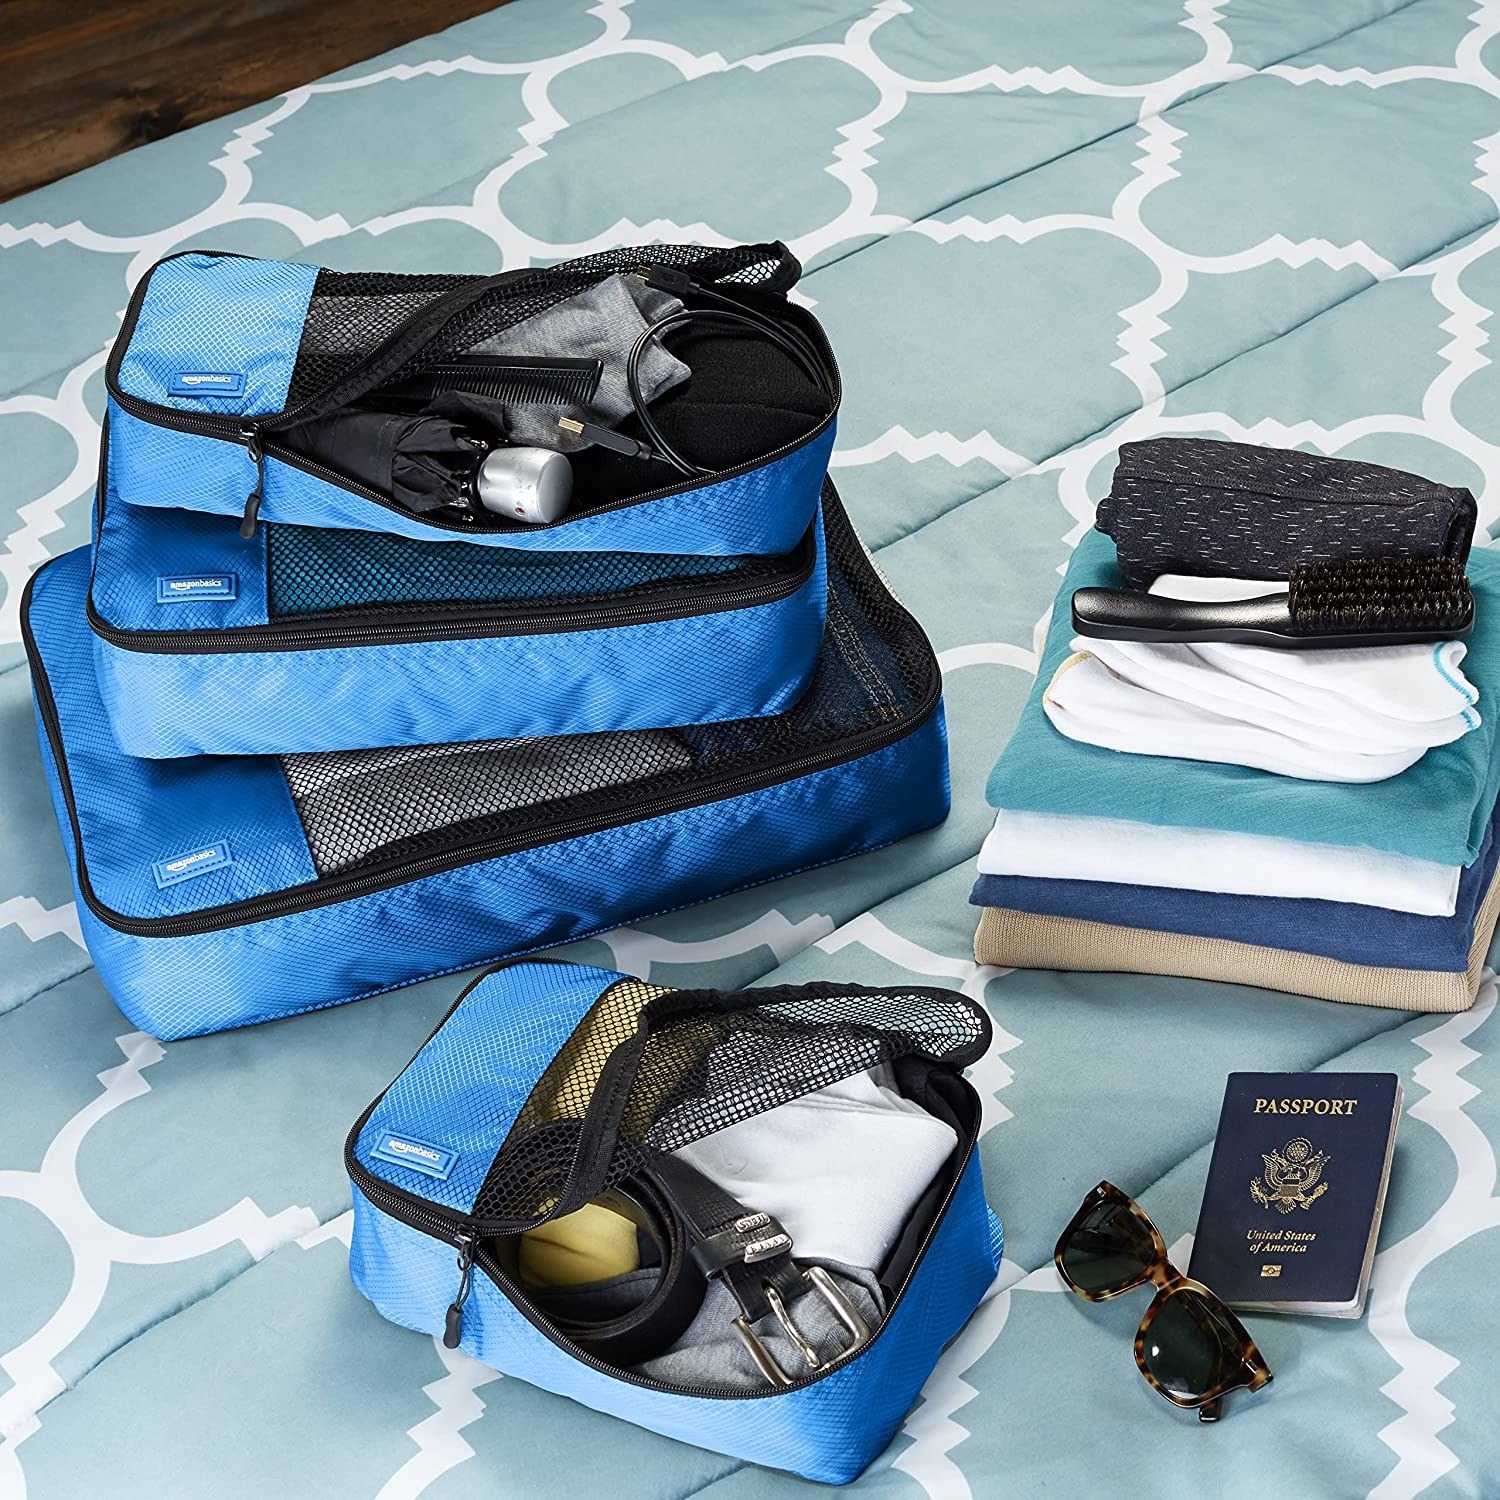 Four filled blue and black packing cubes placed on a bed